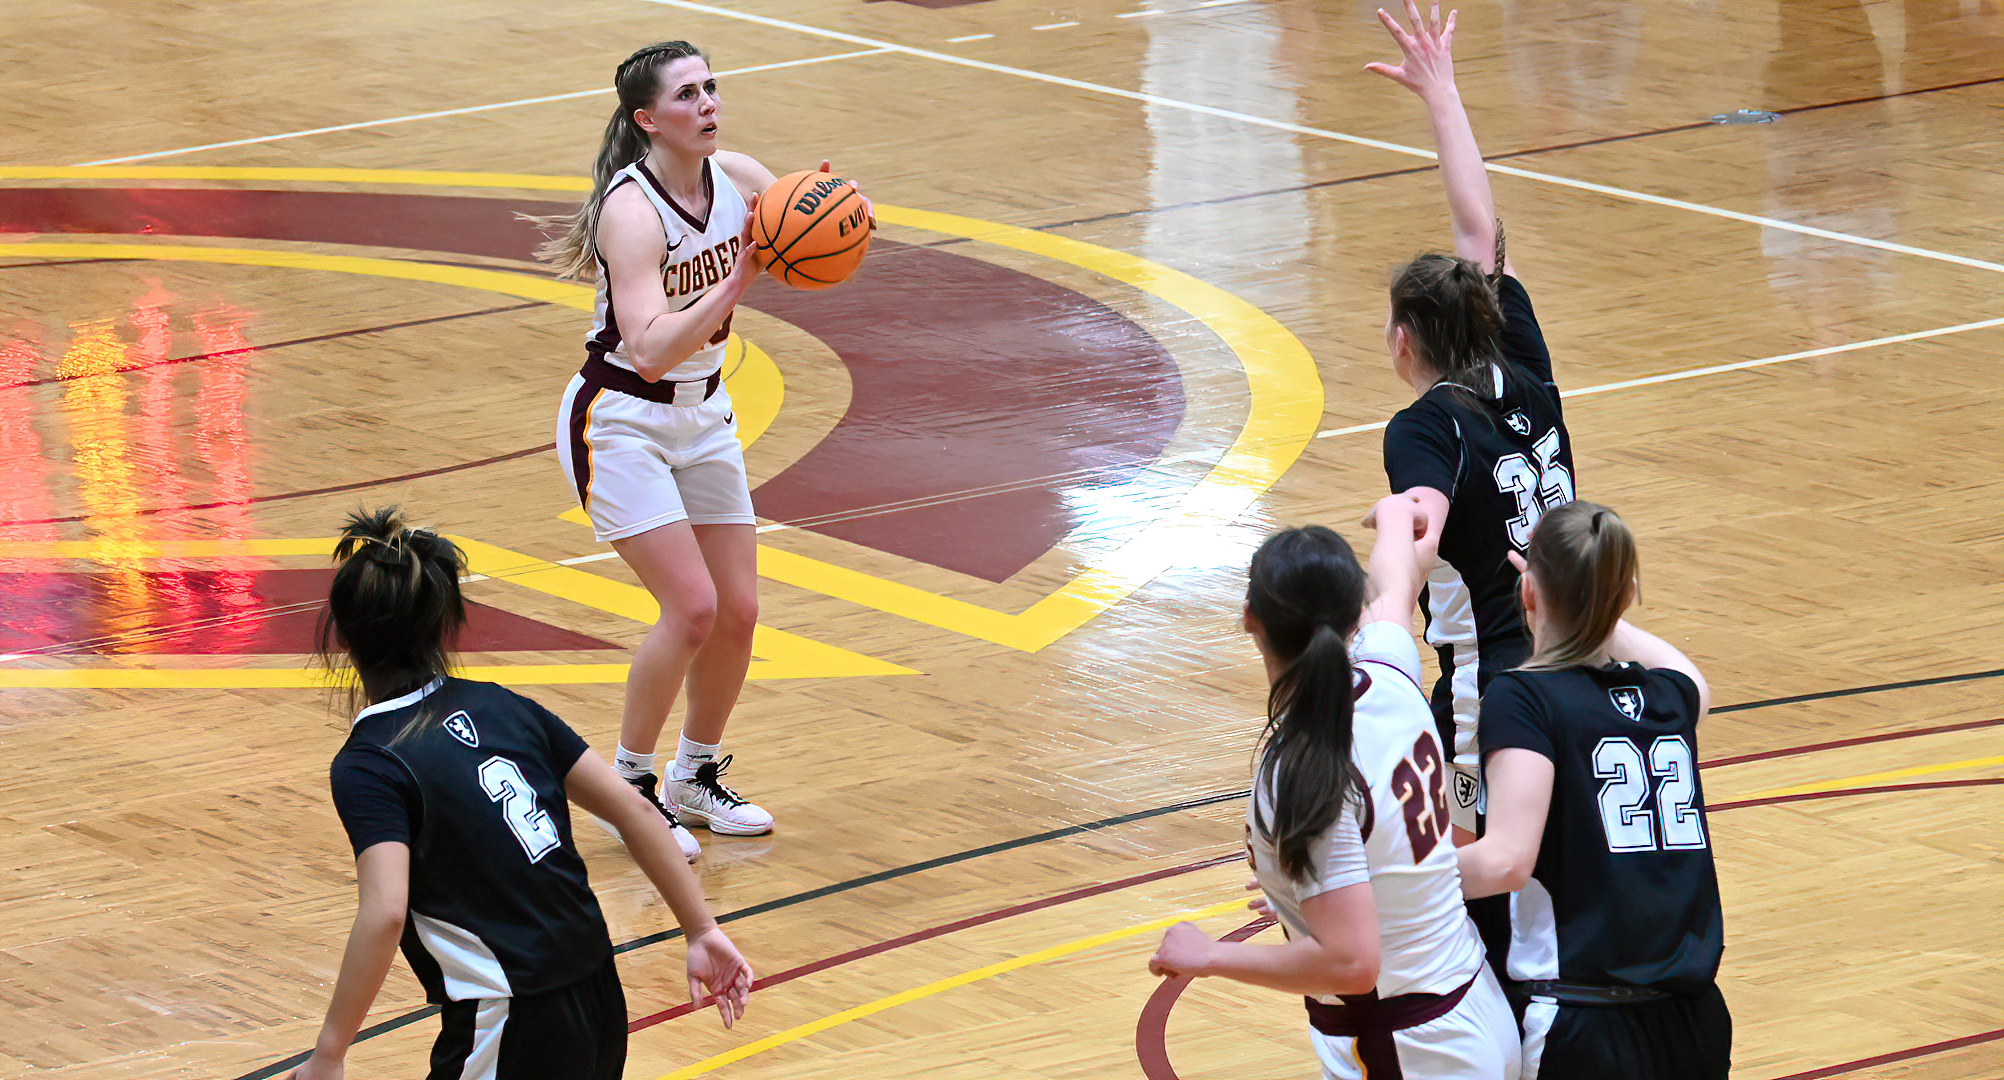 Senior Emily Beseman gets ready to drain one of her two shots from behind the arc in the Cobbers' win over St. olaf. She finished with 18 points.